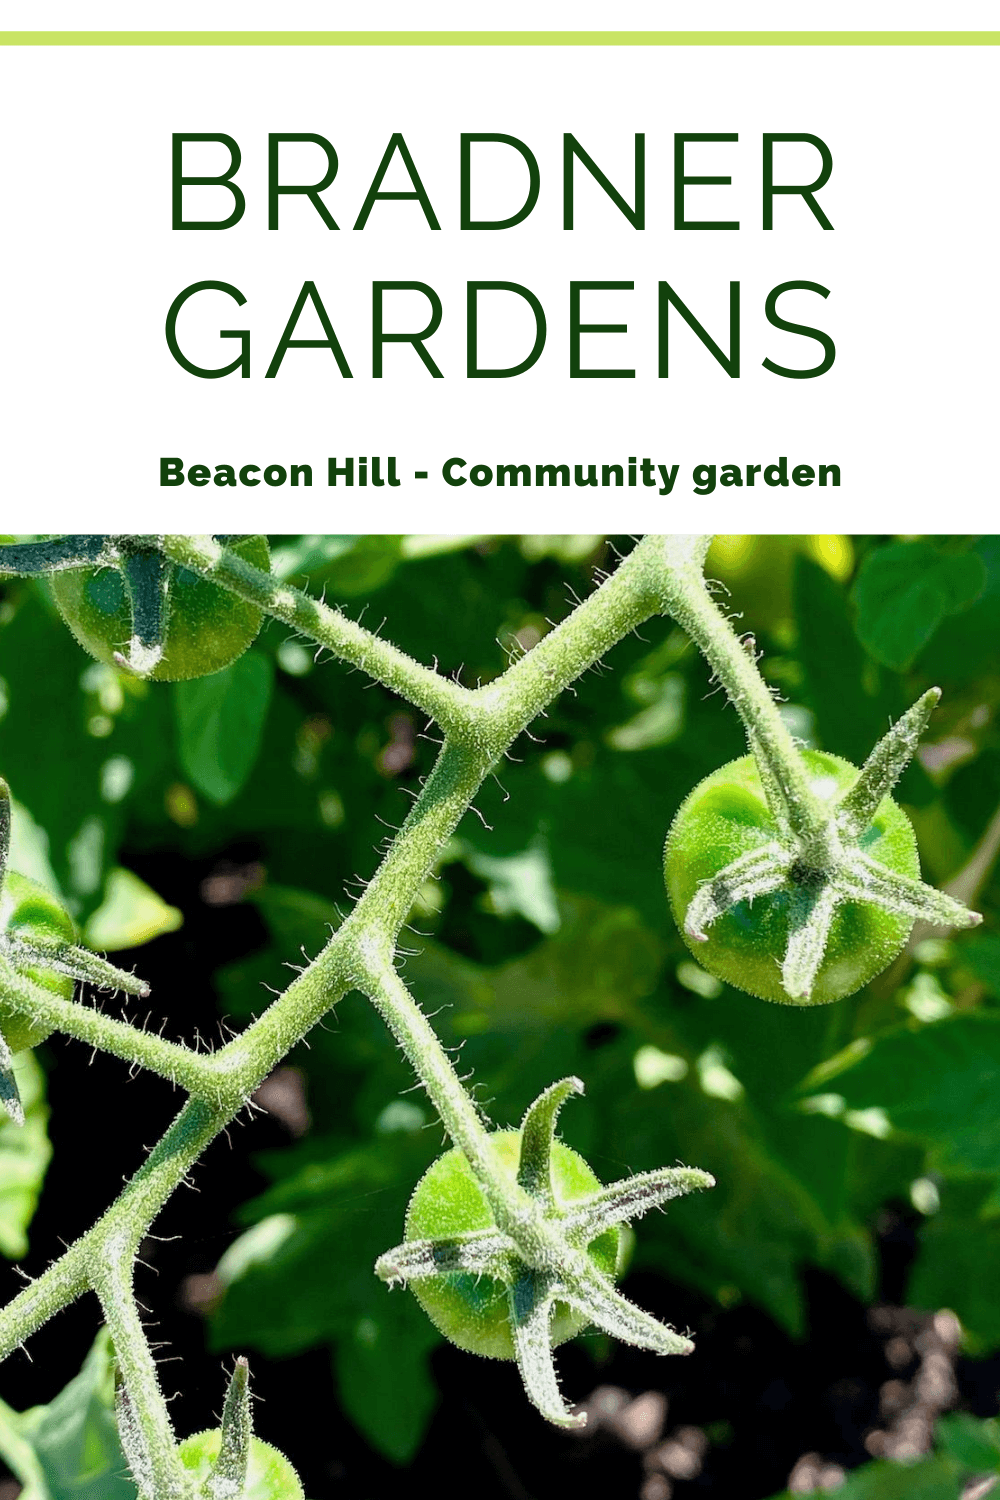 Bradner Gardens are a community space in Seattle with botanicals in all directions, including this branch of a tomato plant, with newly formed fruit, still bright green, clinging to the vines. The branch has tiny hairs and the rich black soil is out of focus below on the ground.